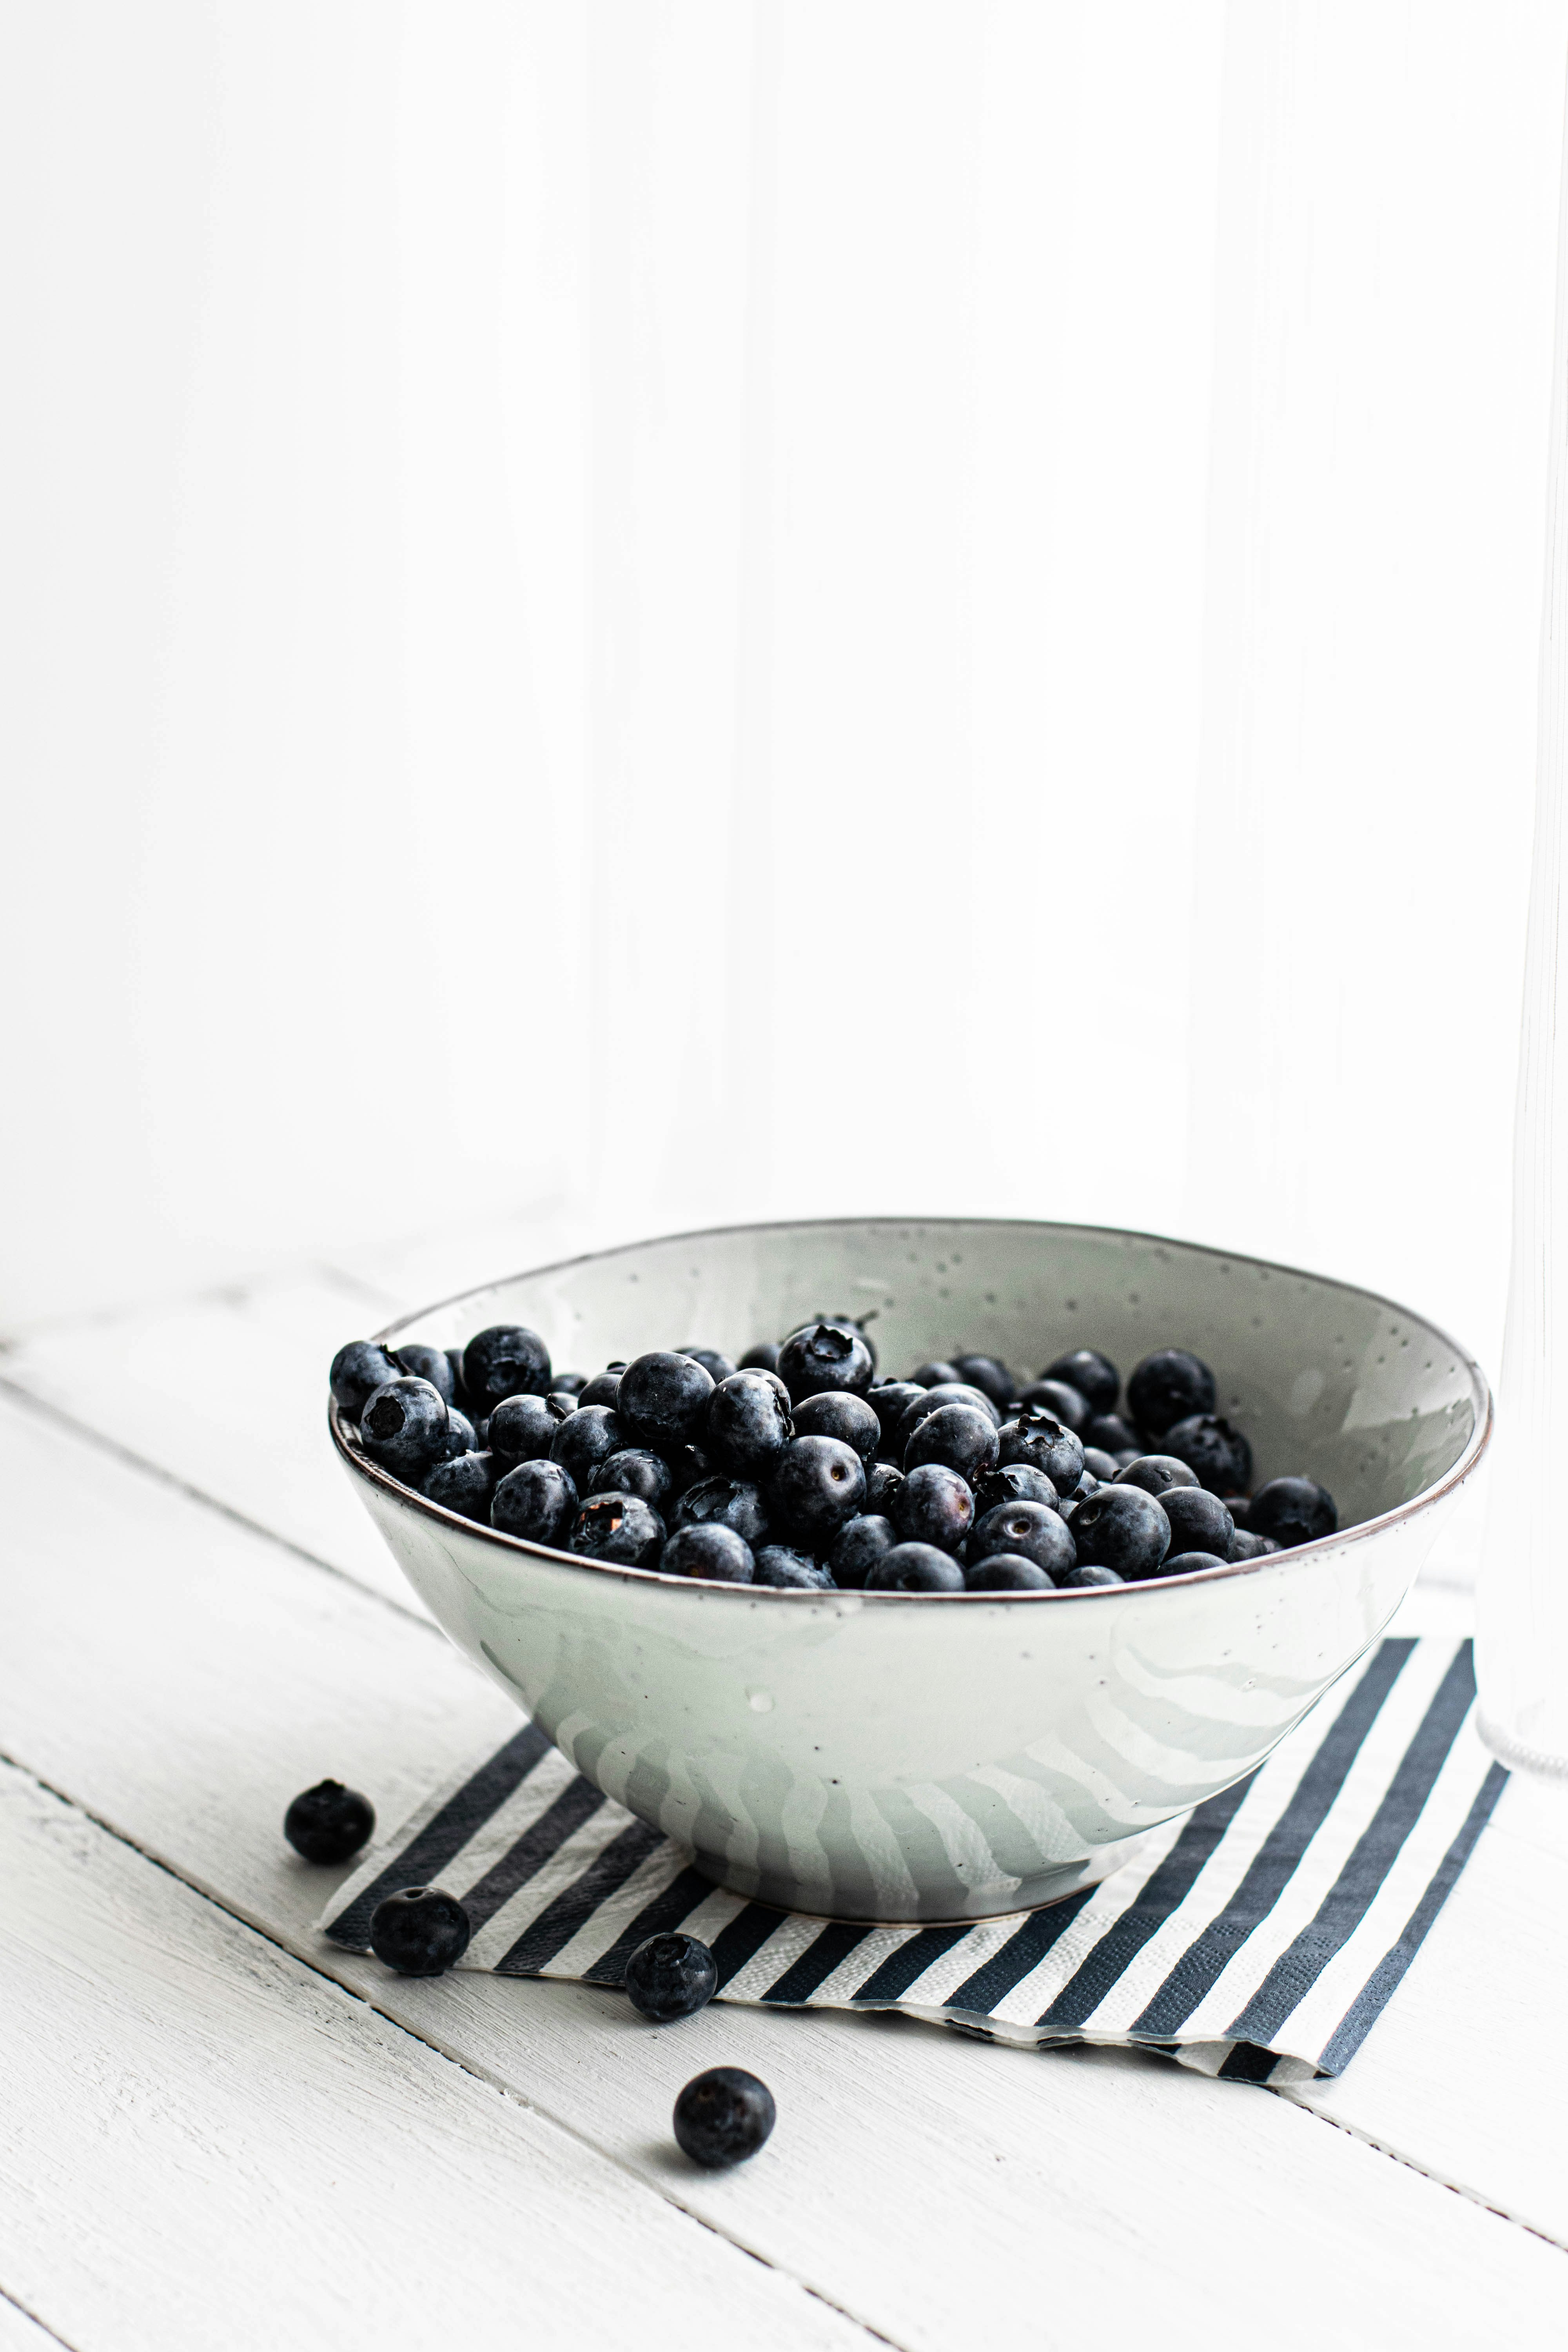 black beans in white ceramic bowl close-up photography